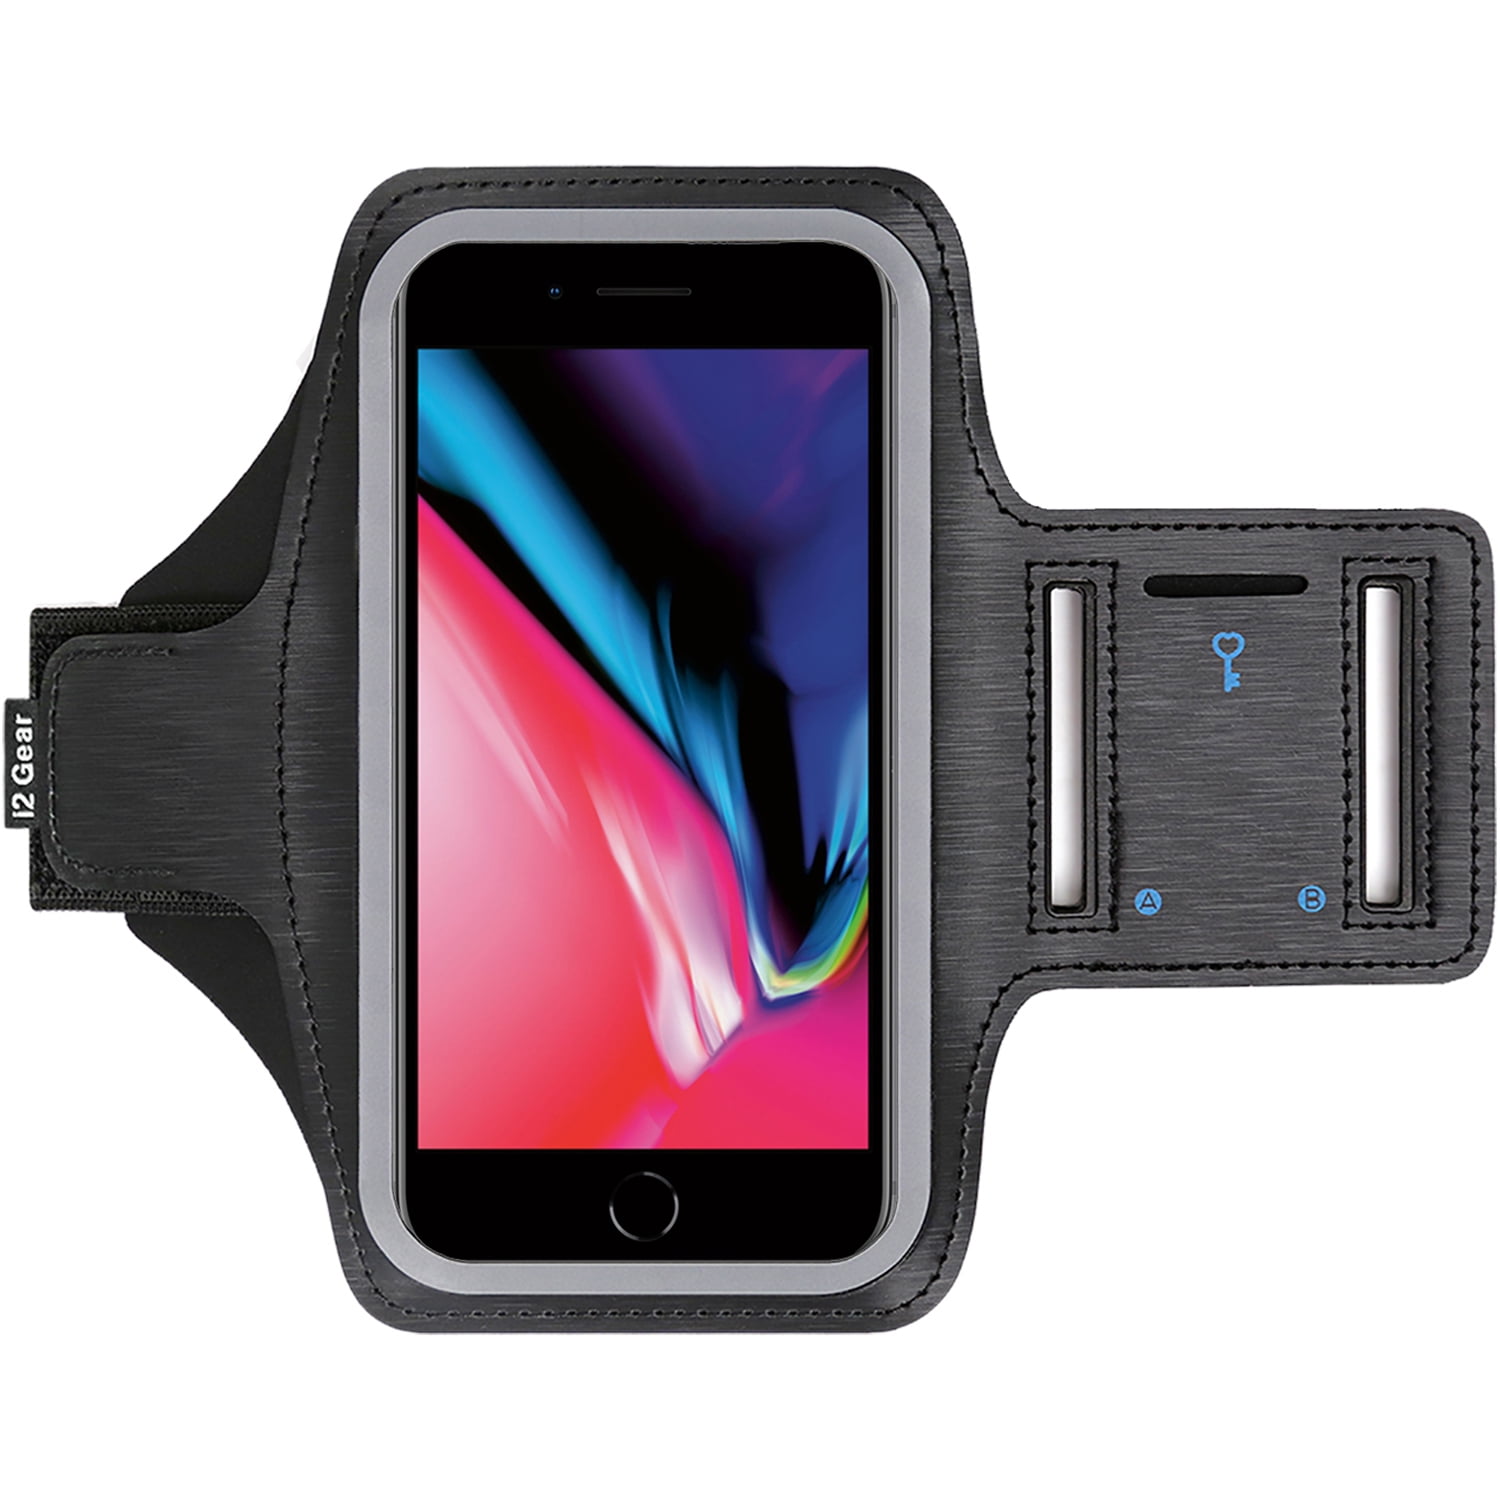 Purple iPhone 11 Pro Max//12 Pro Max//iPhone Xs Max Armband,RUNBACH Sweatproof Running Exercise Bag with Fingerprint Touch and Card Slot Compatible with iPhone 12 Pro Max,11 Pro Max,XS Max